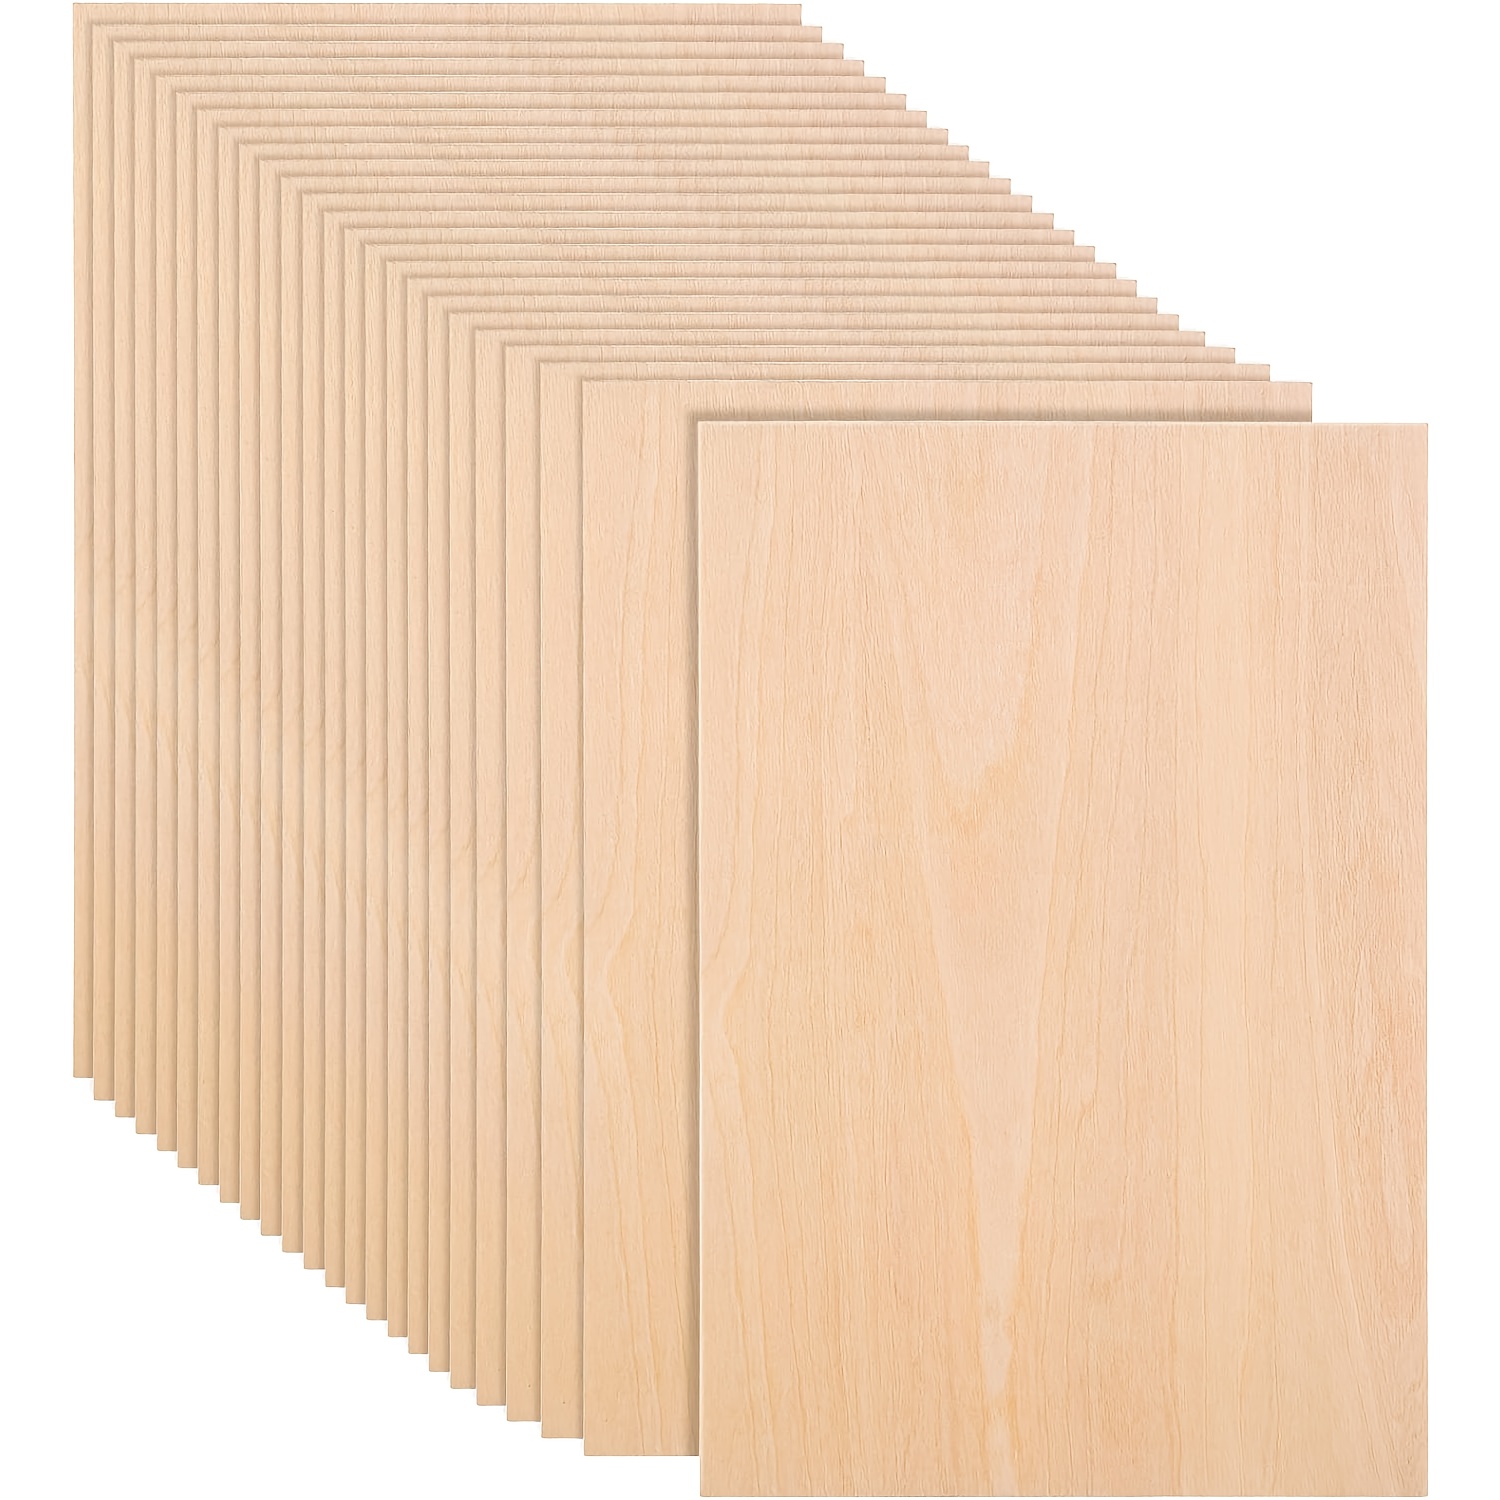 100 Pieces 4x4 Inch Wood Squares Unfinished Basswood Plywood Wooden Sheets  1/8 inch Thick Blank Wood Squares for Crafts Painting Scrabble Tiles Mini